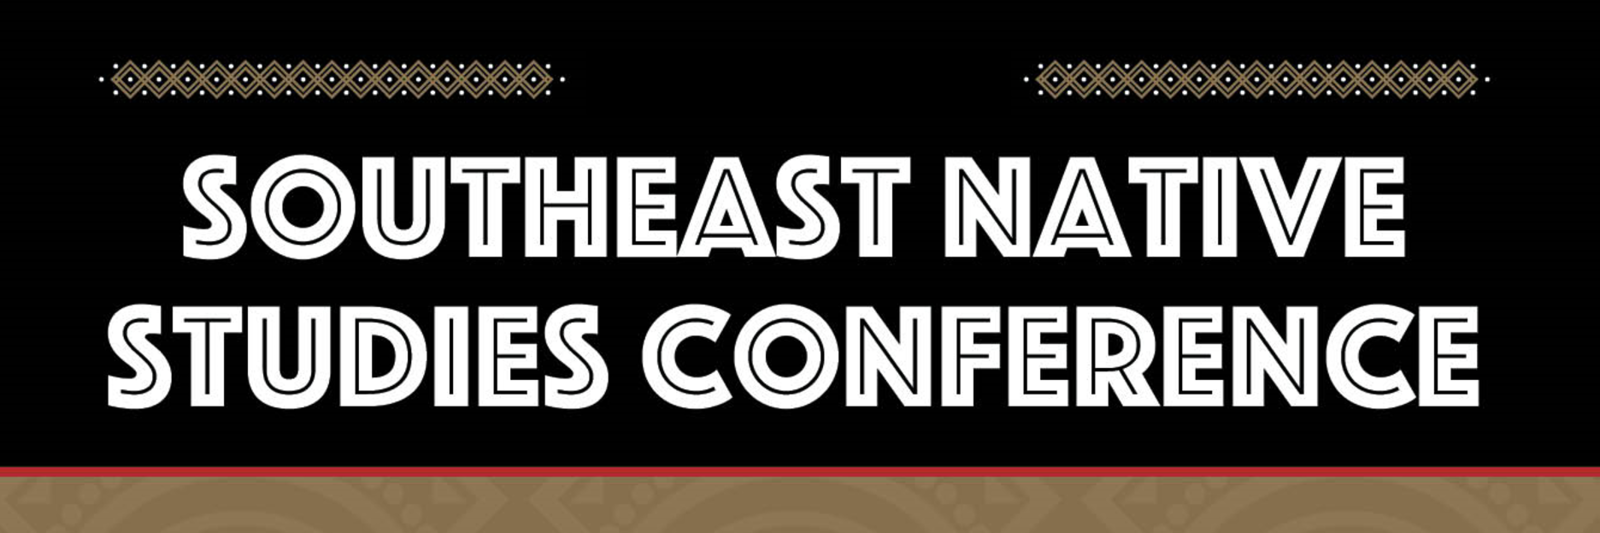 Southeast Native Studies Conference